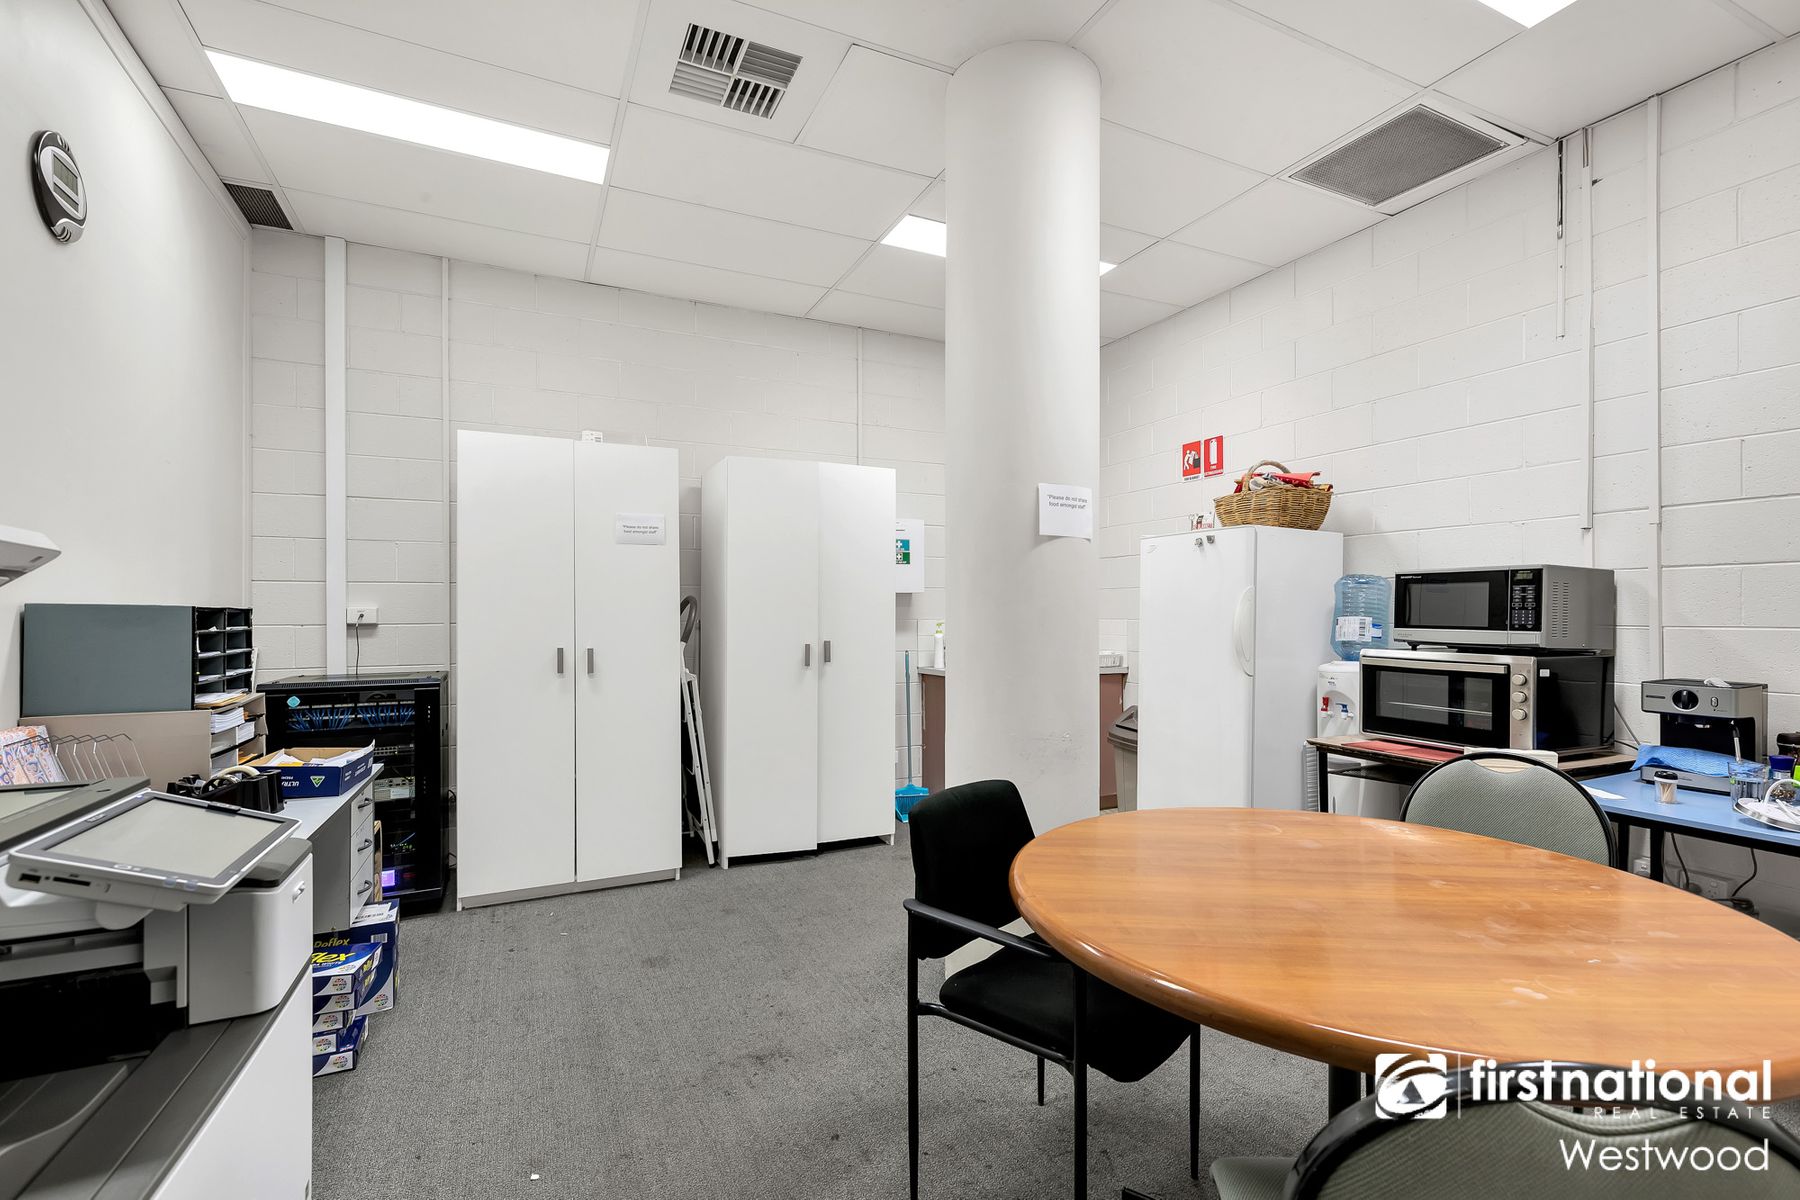 13,14,15/2-14 Station Place, Werribee, VIC 3030